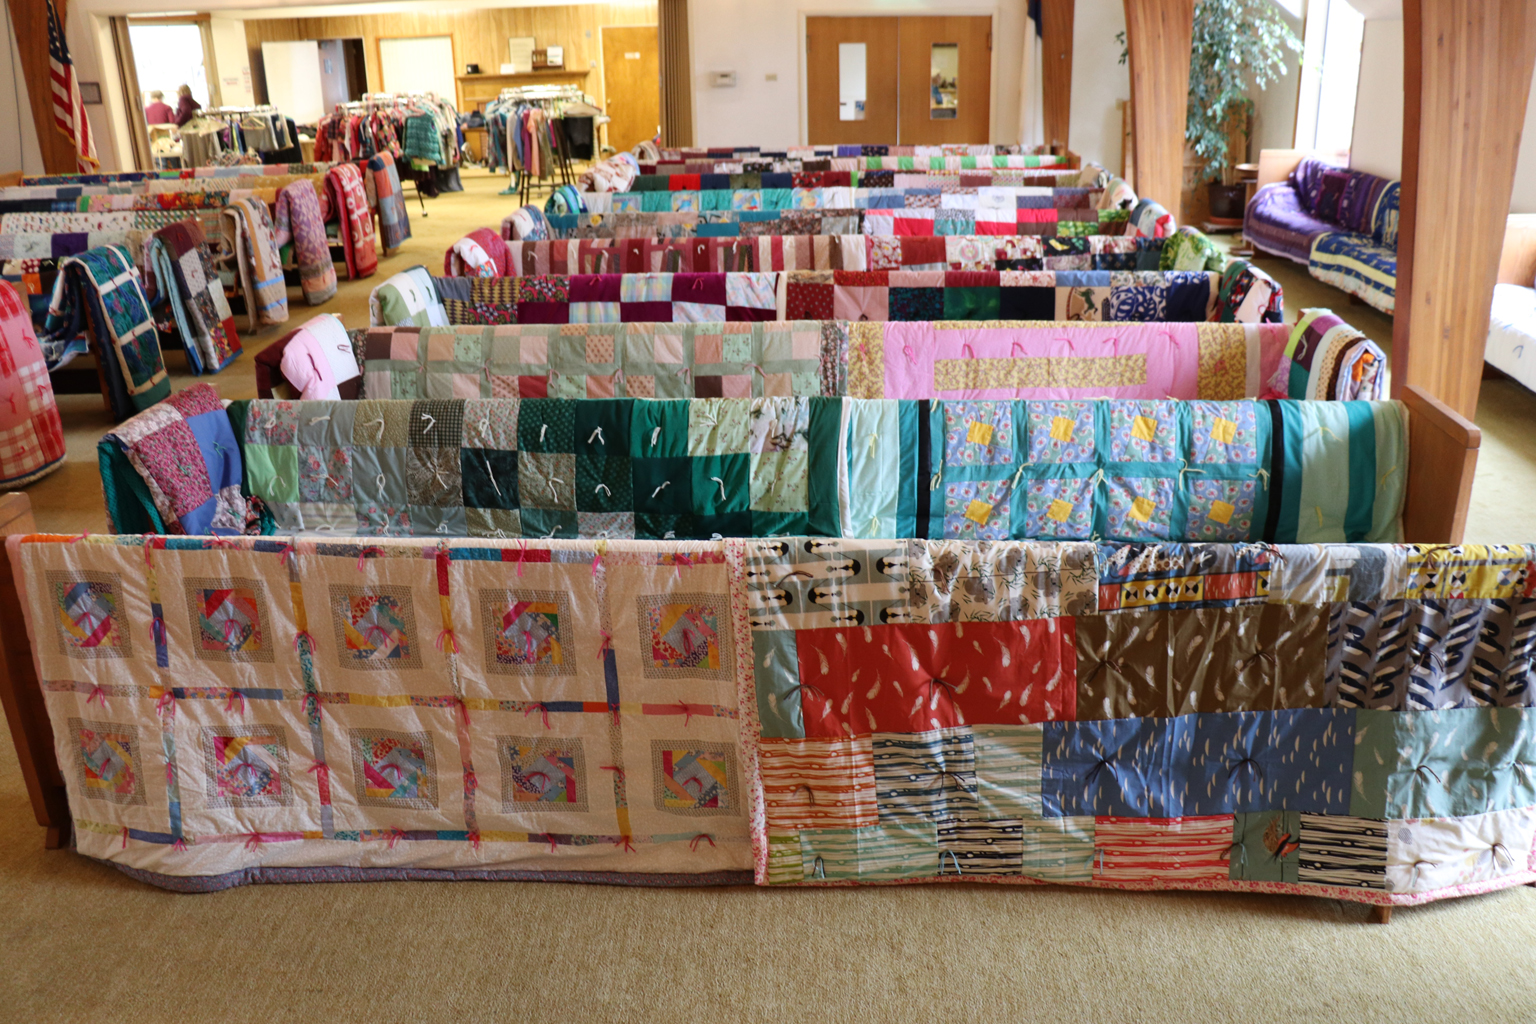 Quilts on display in the sanctuary